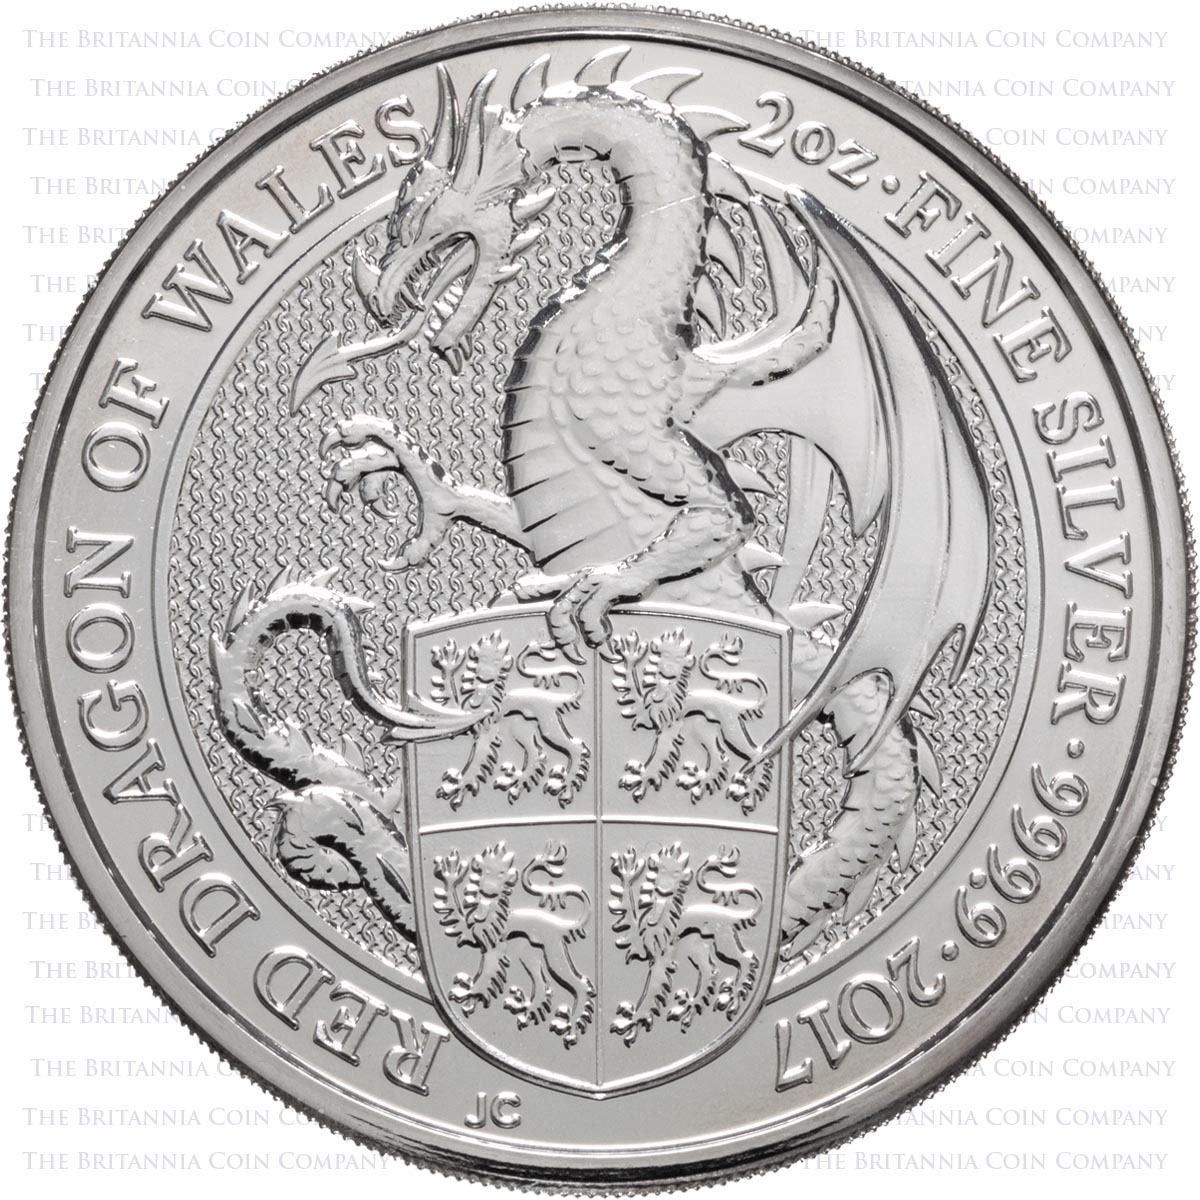 2017 Queens Beasts Red Dragon Of Wales Two Ounce Silver Bullion Coin Reverse